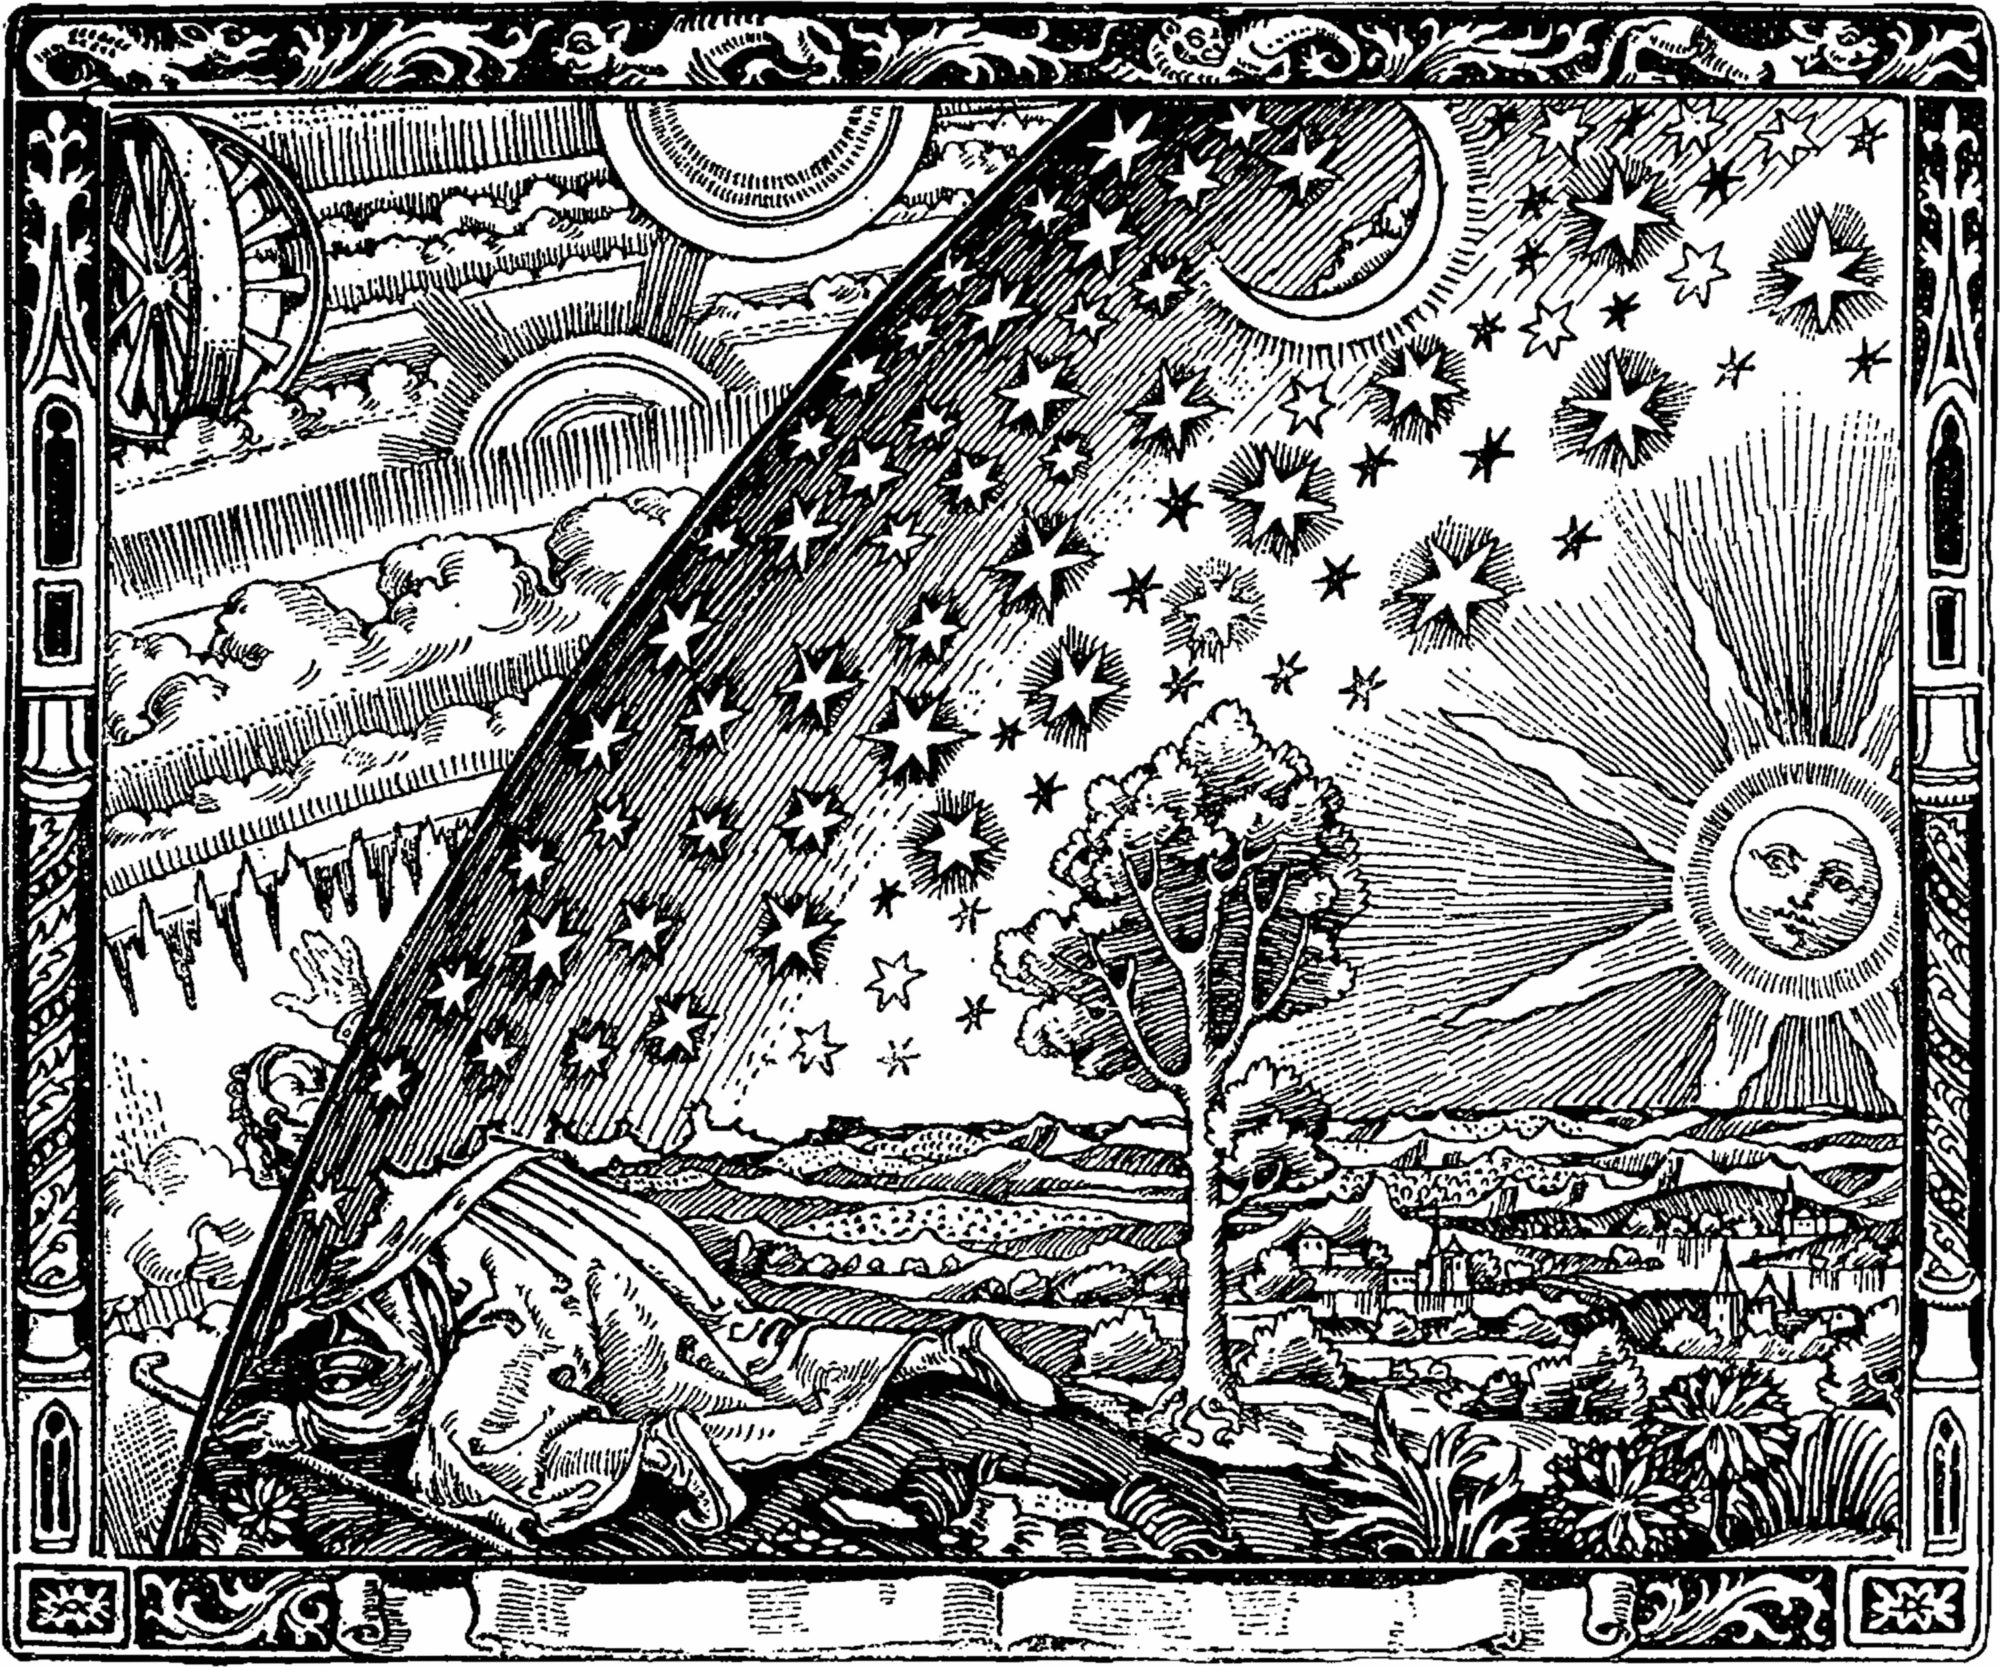 An engraving by Camille Flammarion depicting the night sky, ca. 1888.